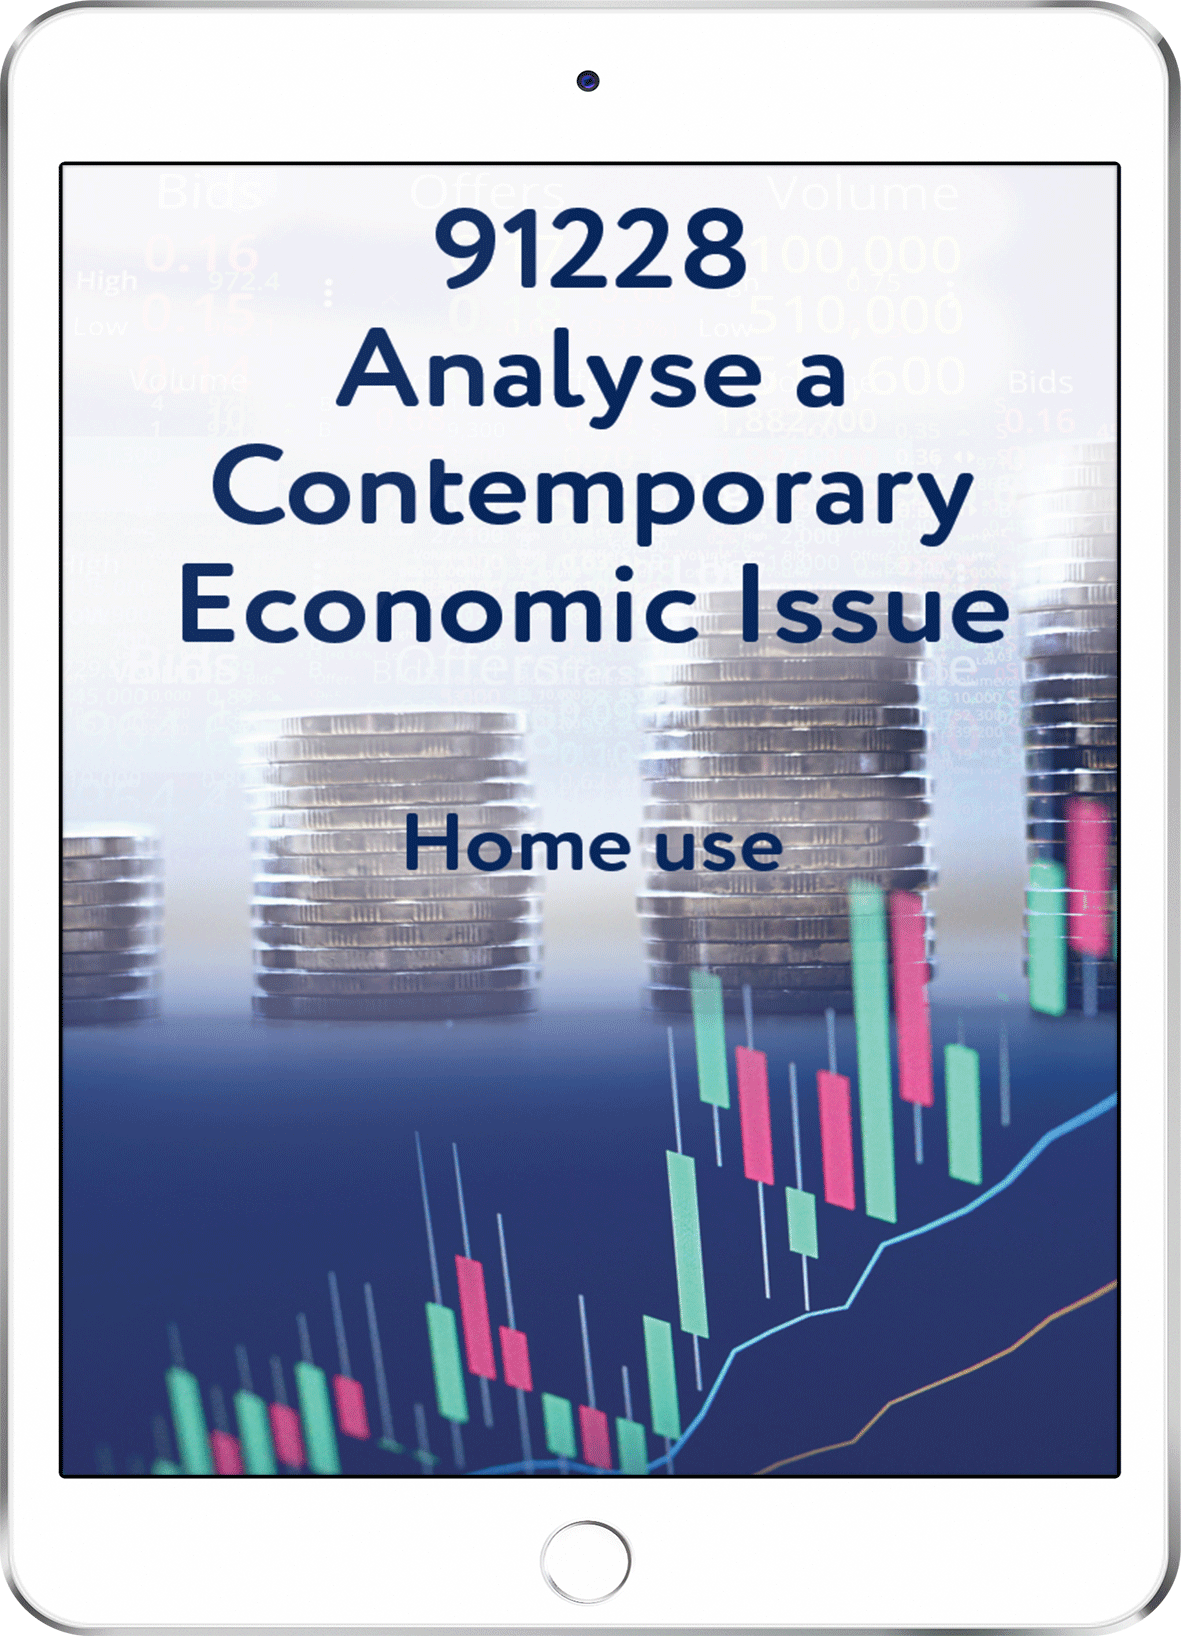 91228 Analyse a Contemporary Economic Issue - Home Use